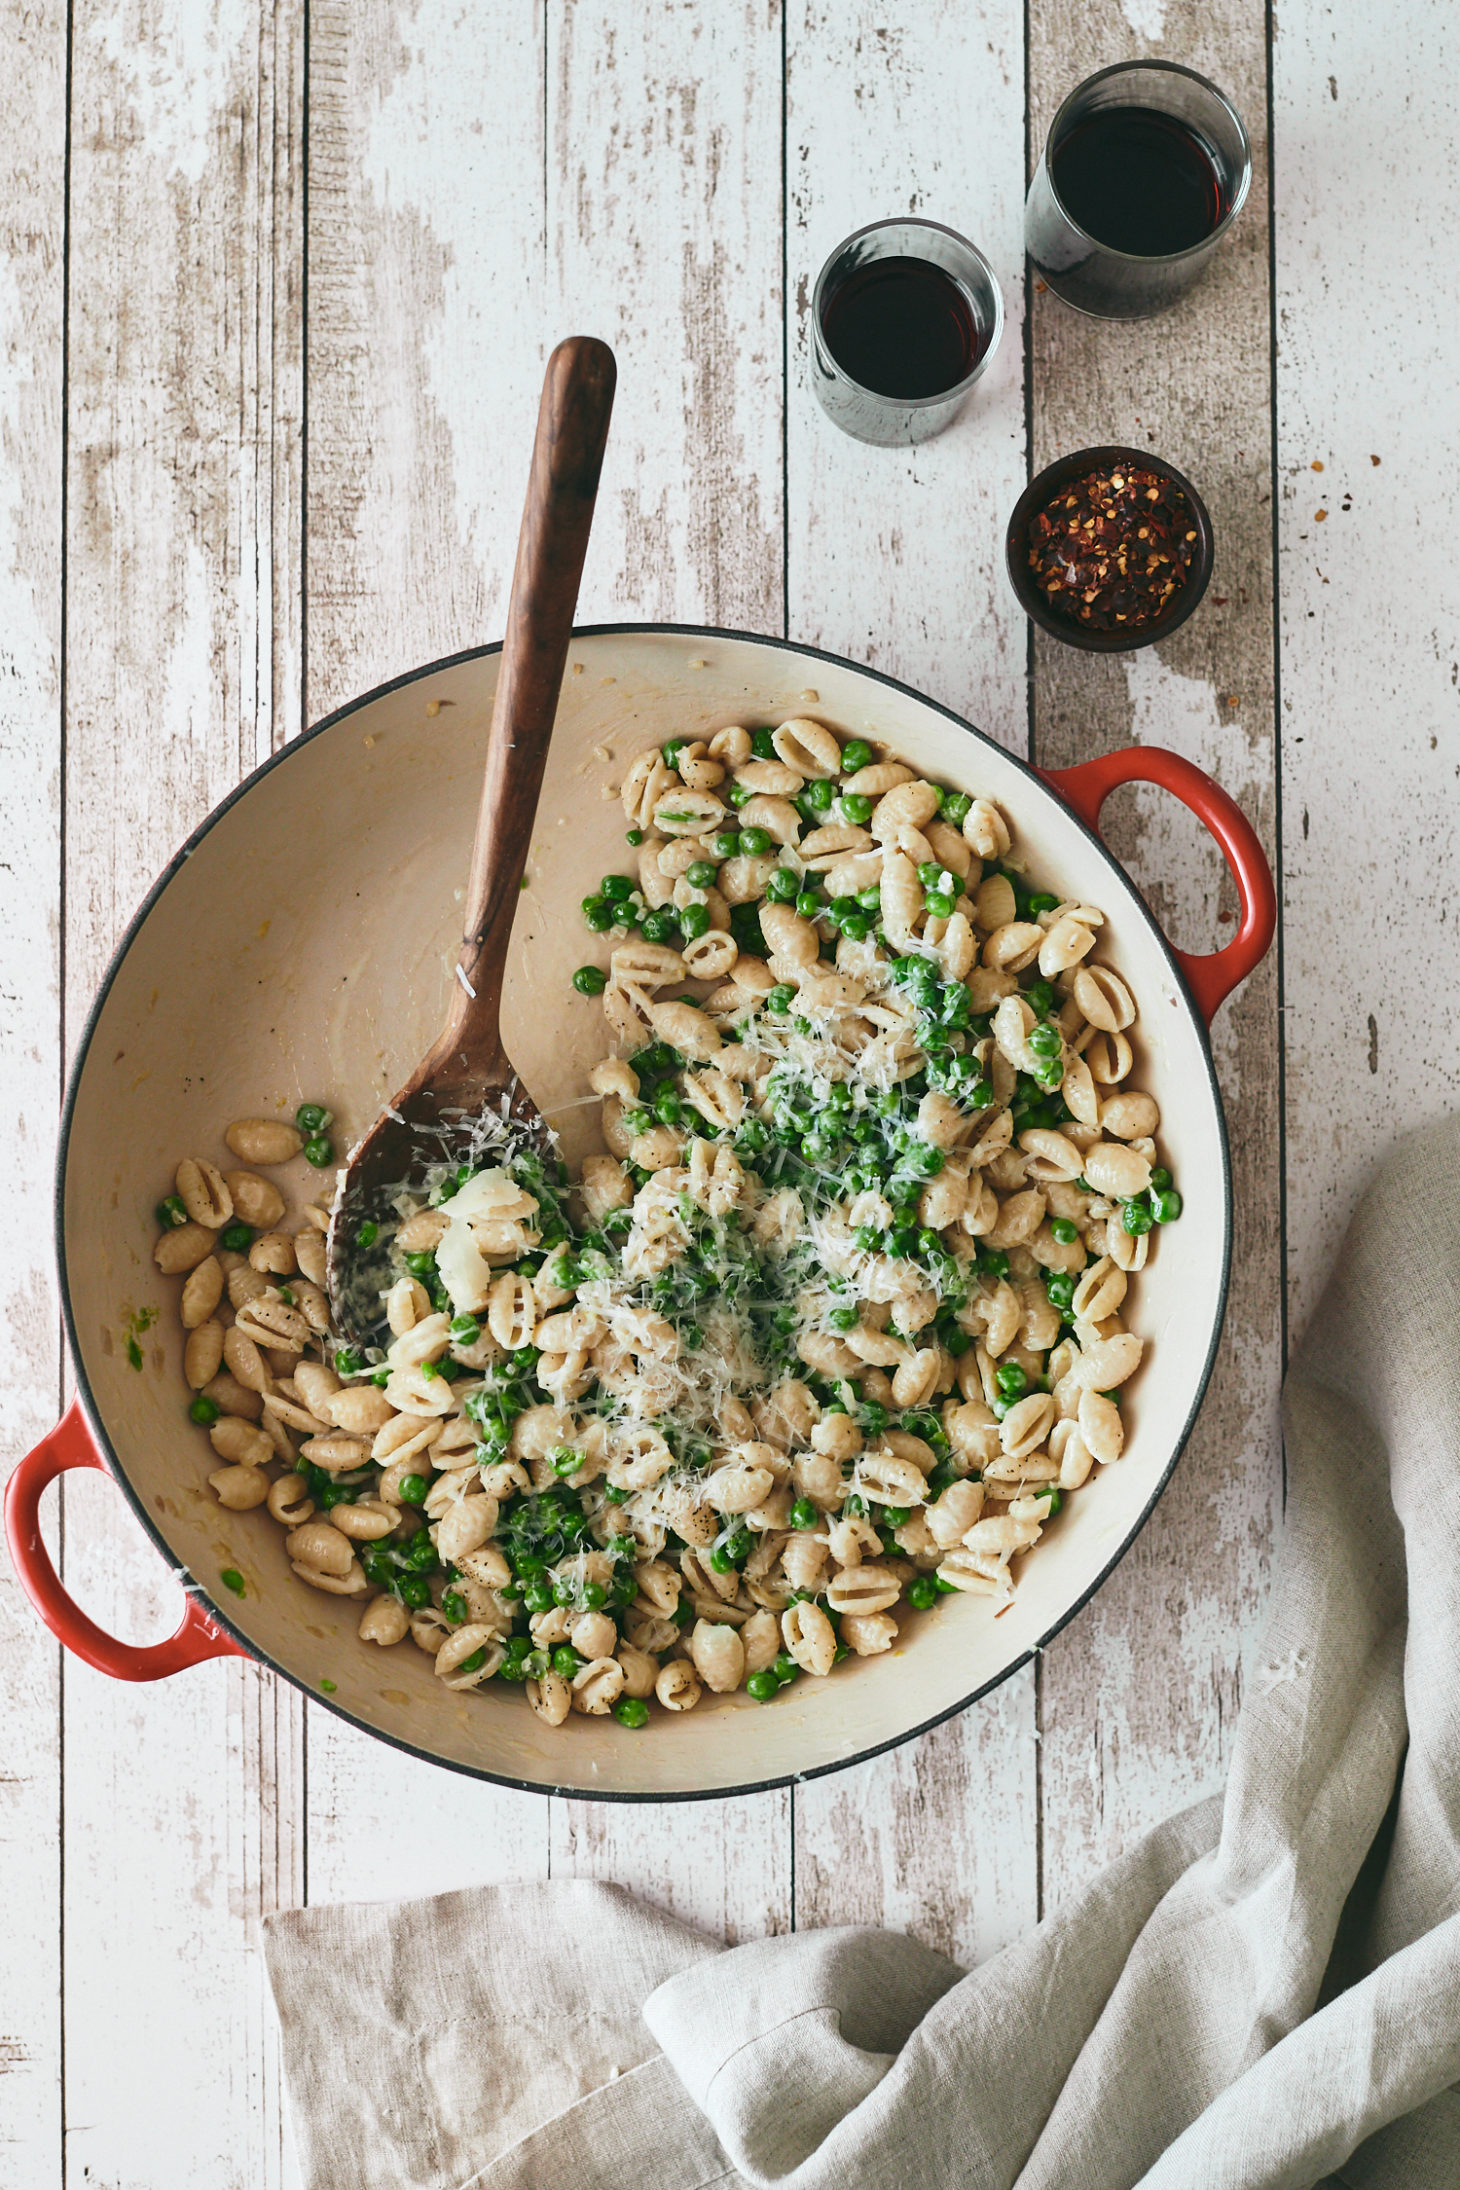 Creamy Pasta with peas and a parmesan-shallot cream sauce